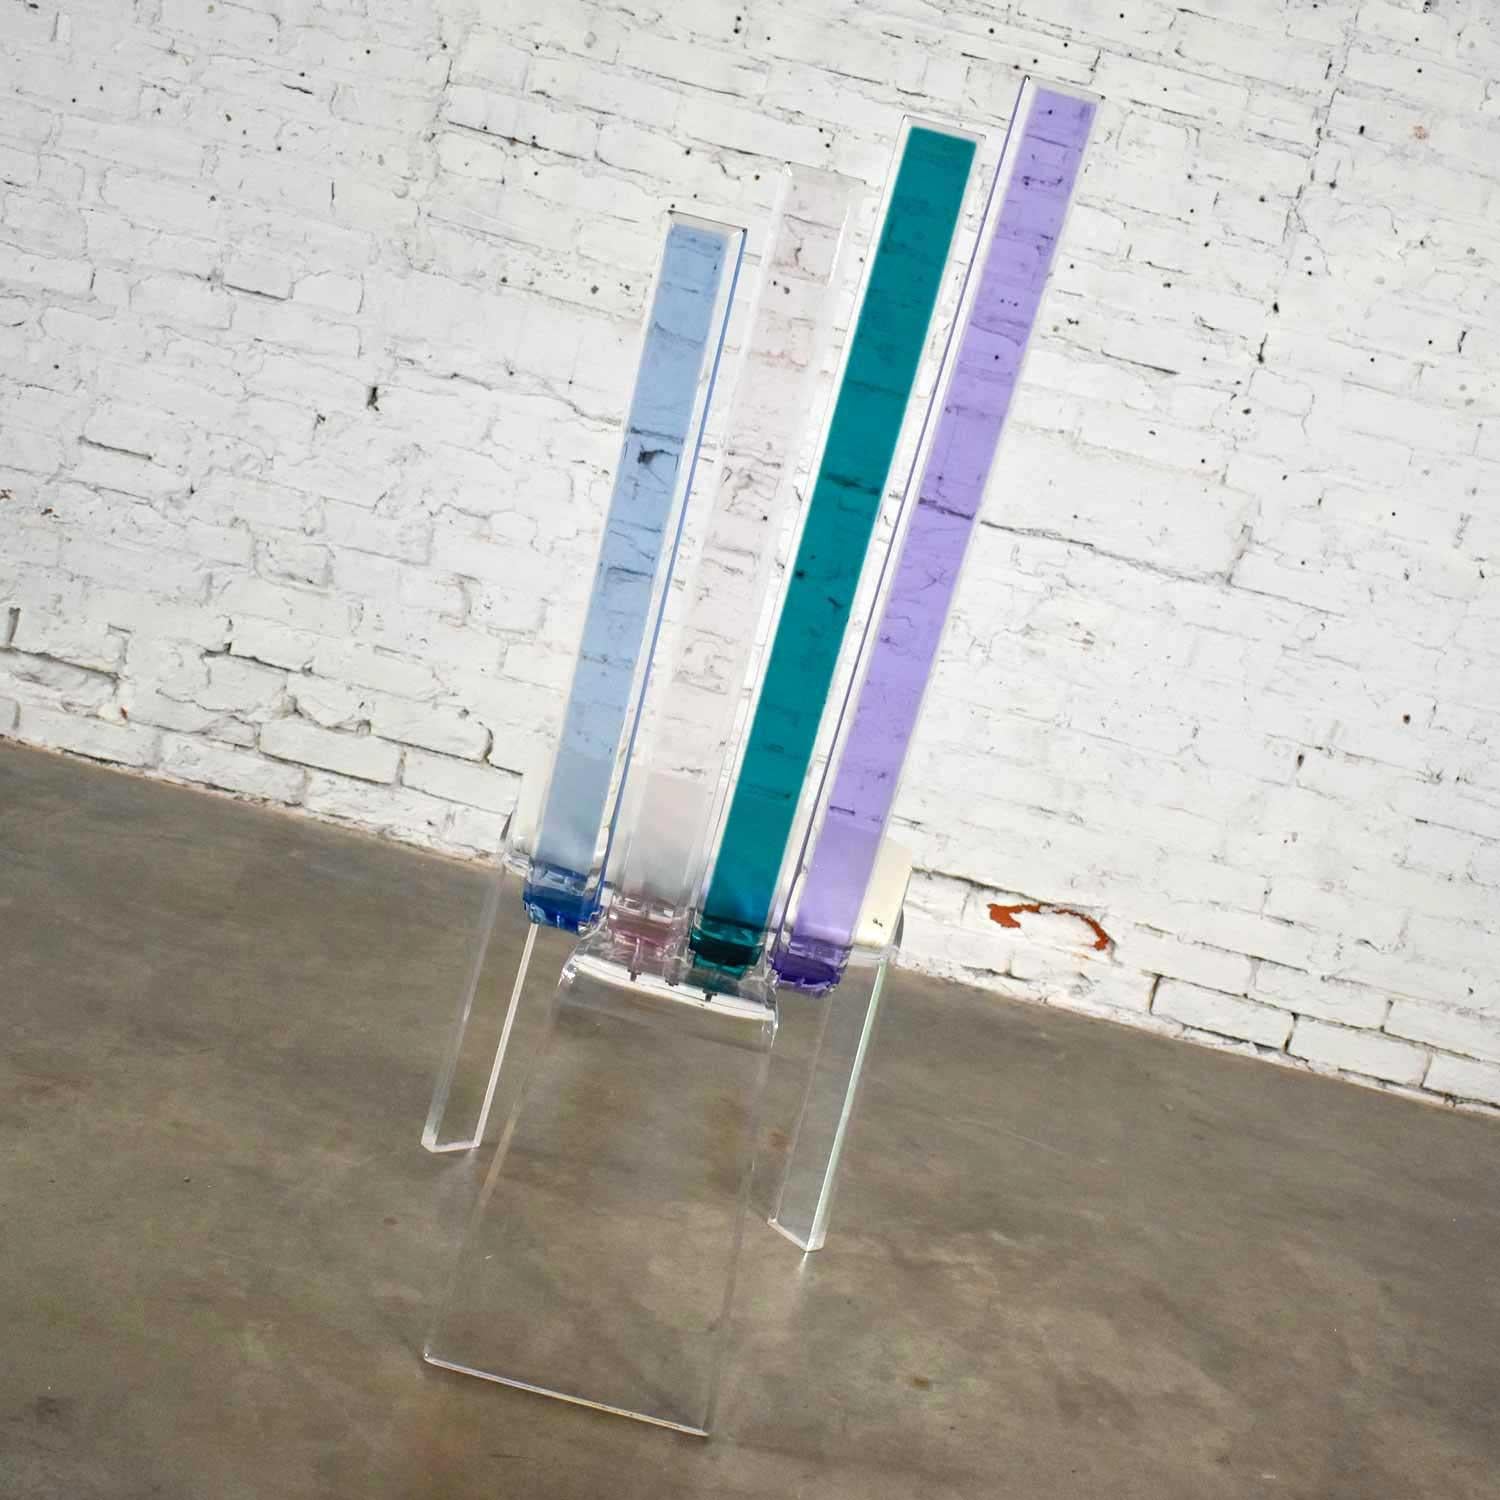 Modern Lucite Chair Rainbow Graduated Back Slats Attr Shlomi Haziza for H Studio In Good Condition For Sale In Topeka, KS